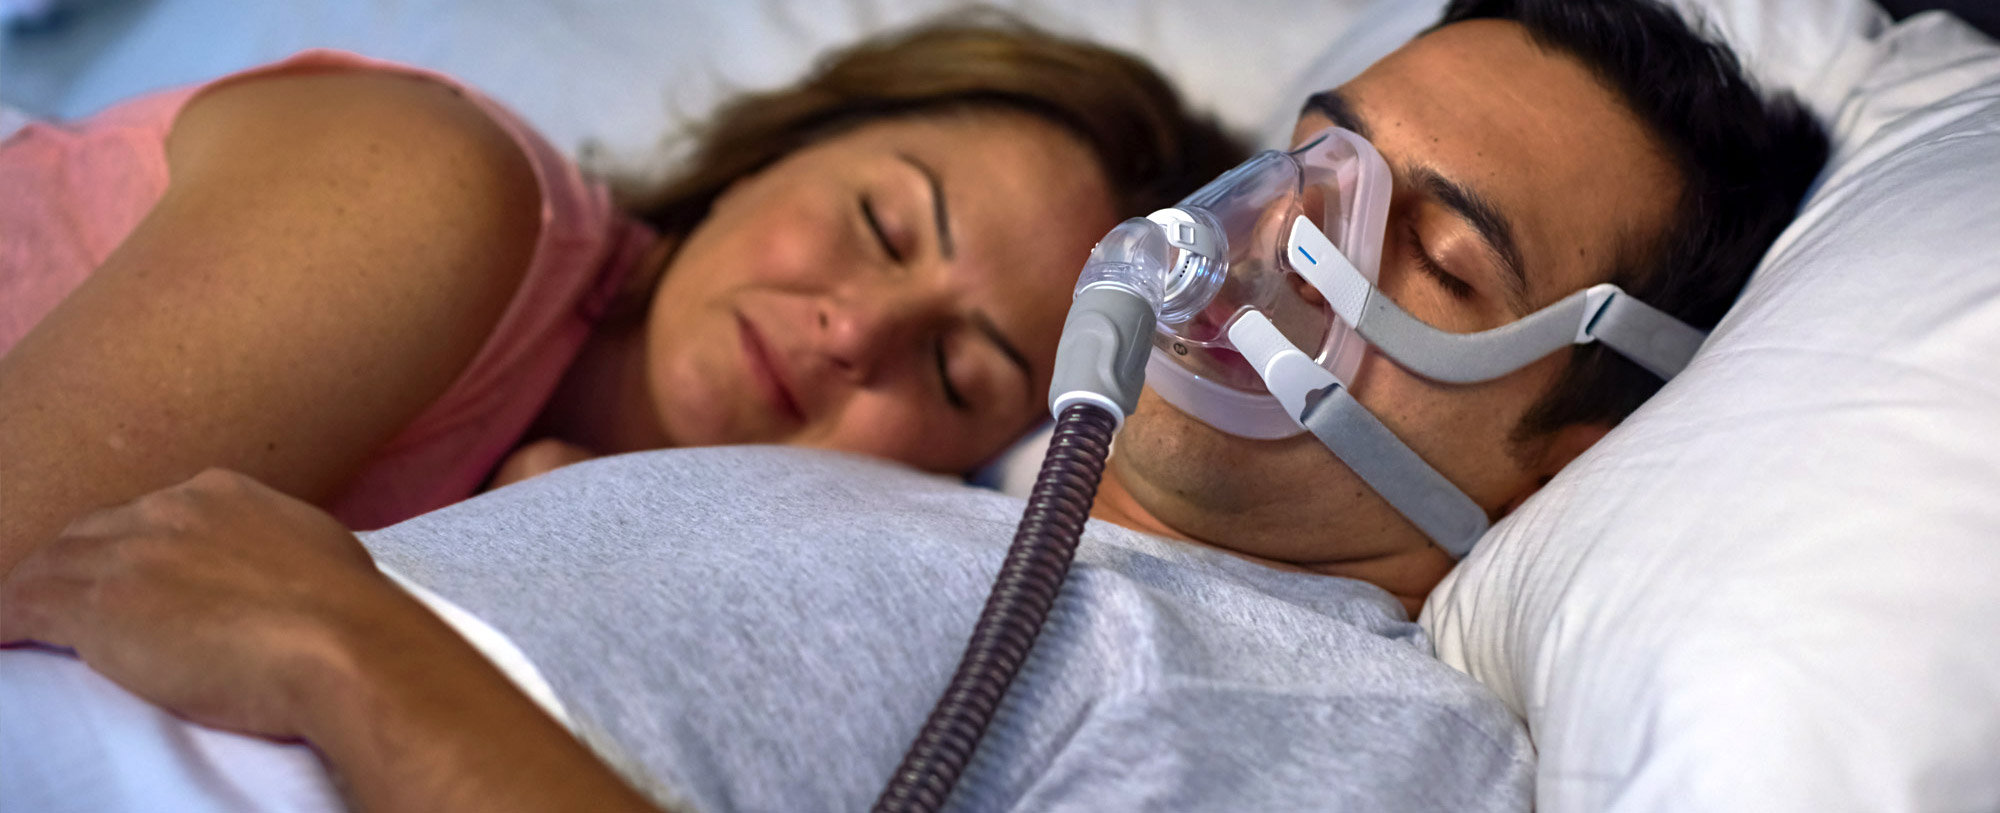 Resmeds New Range Of Cpap Masks The Airfit™ F20 Full Face And The Airfit N20 Nasal 9278